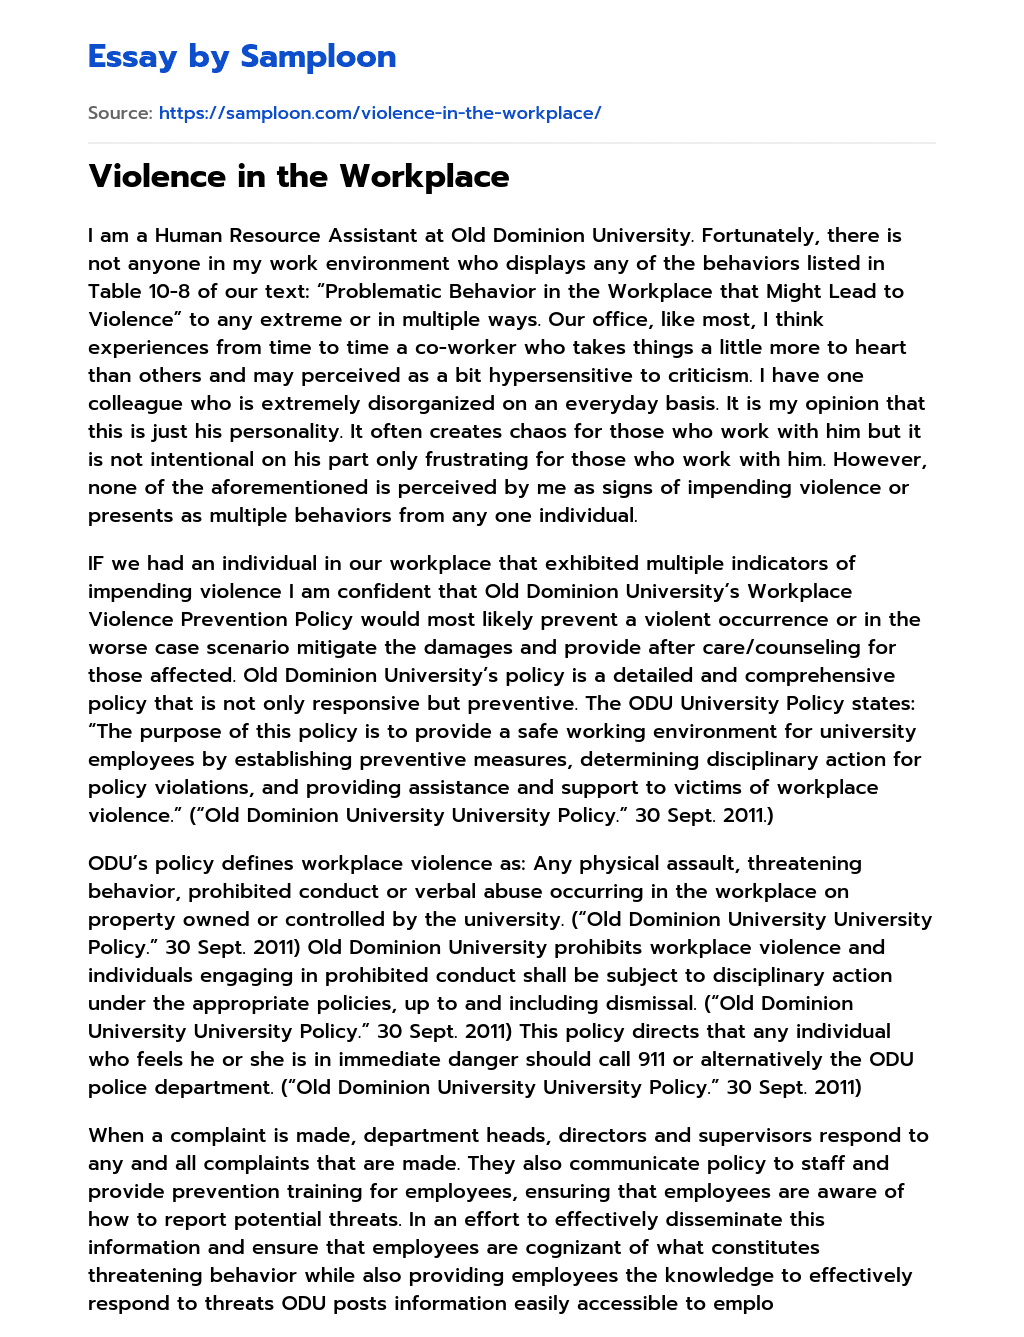 Violence in the Workplace essay